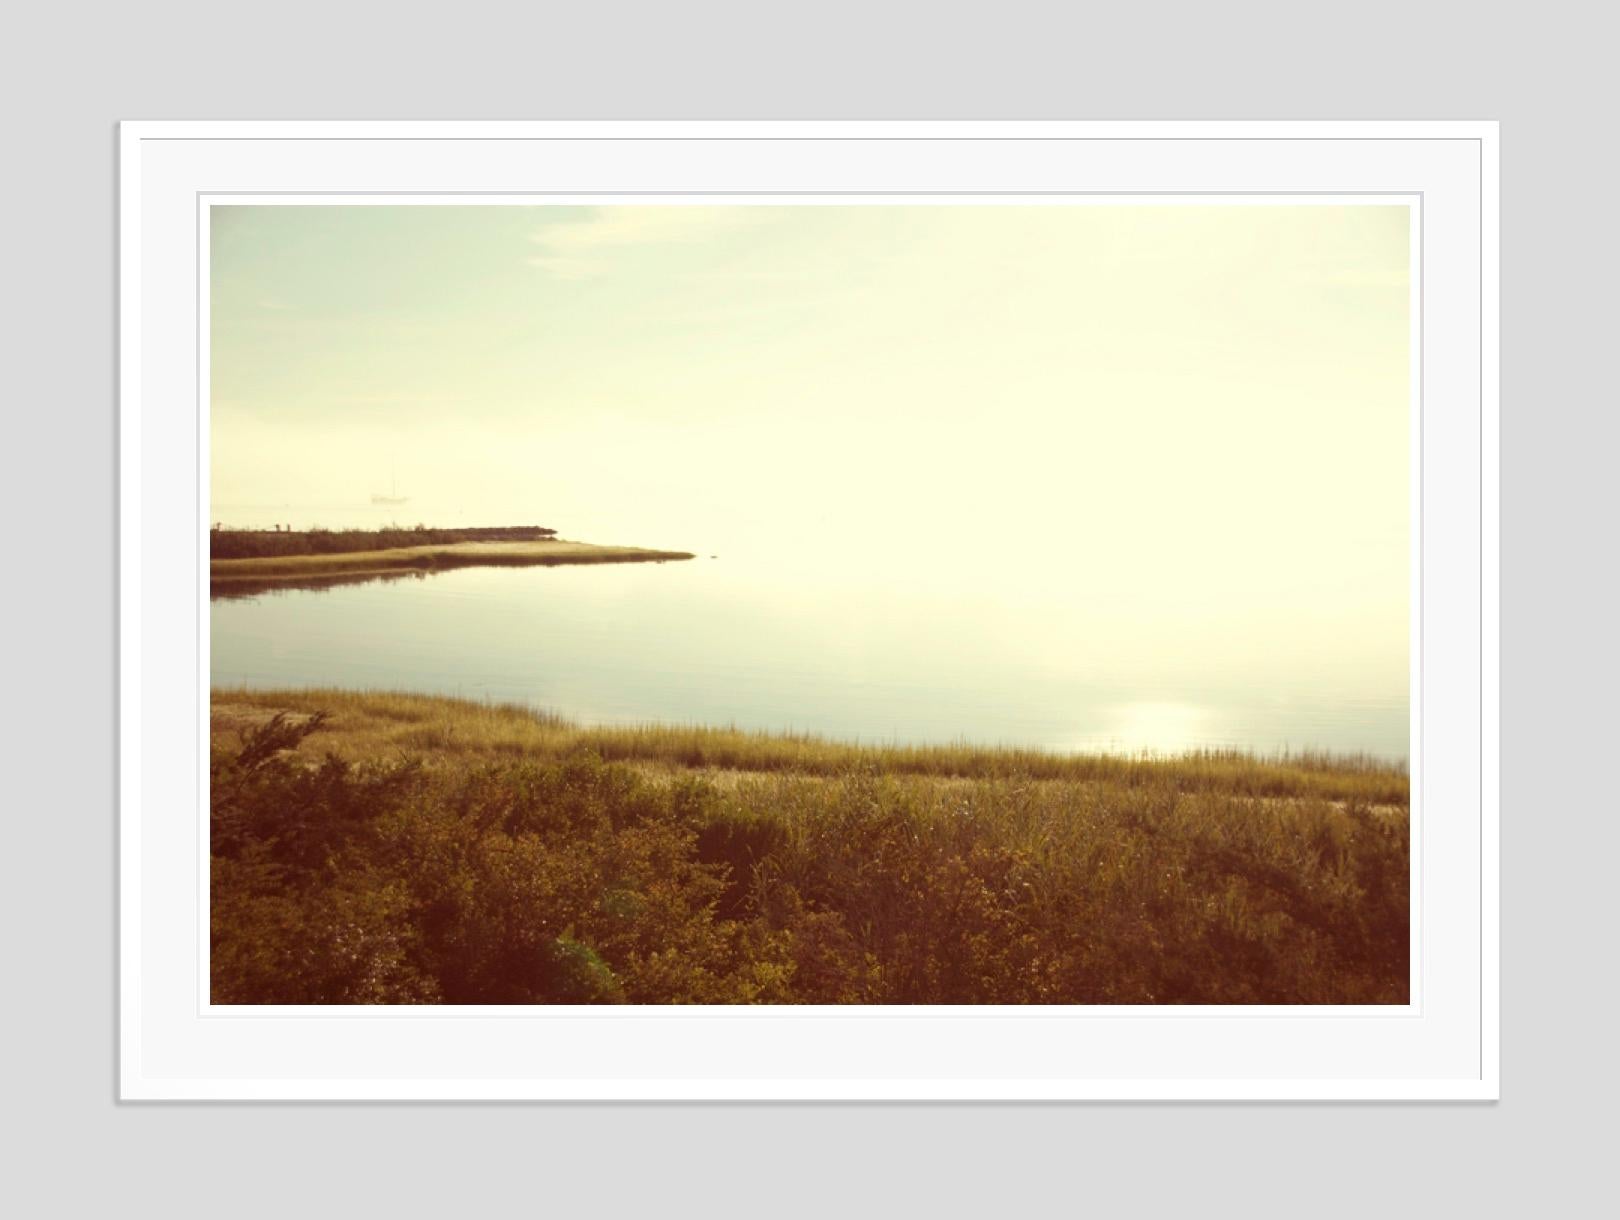 Marion Misty Morning -  Oversize Signed Limited Edition Print  - Yellow Color Photograph by Stuart Möller